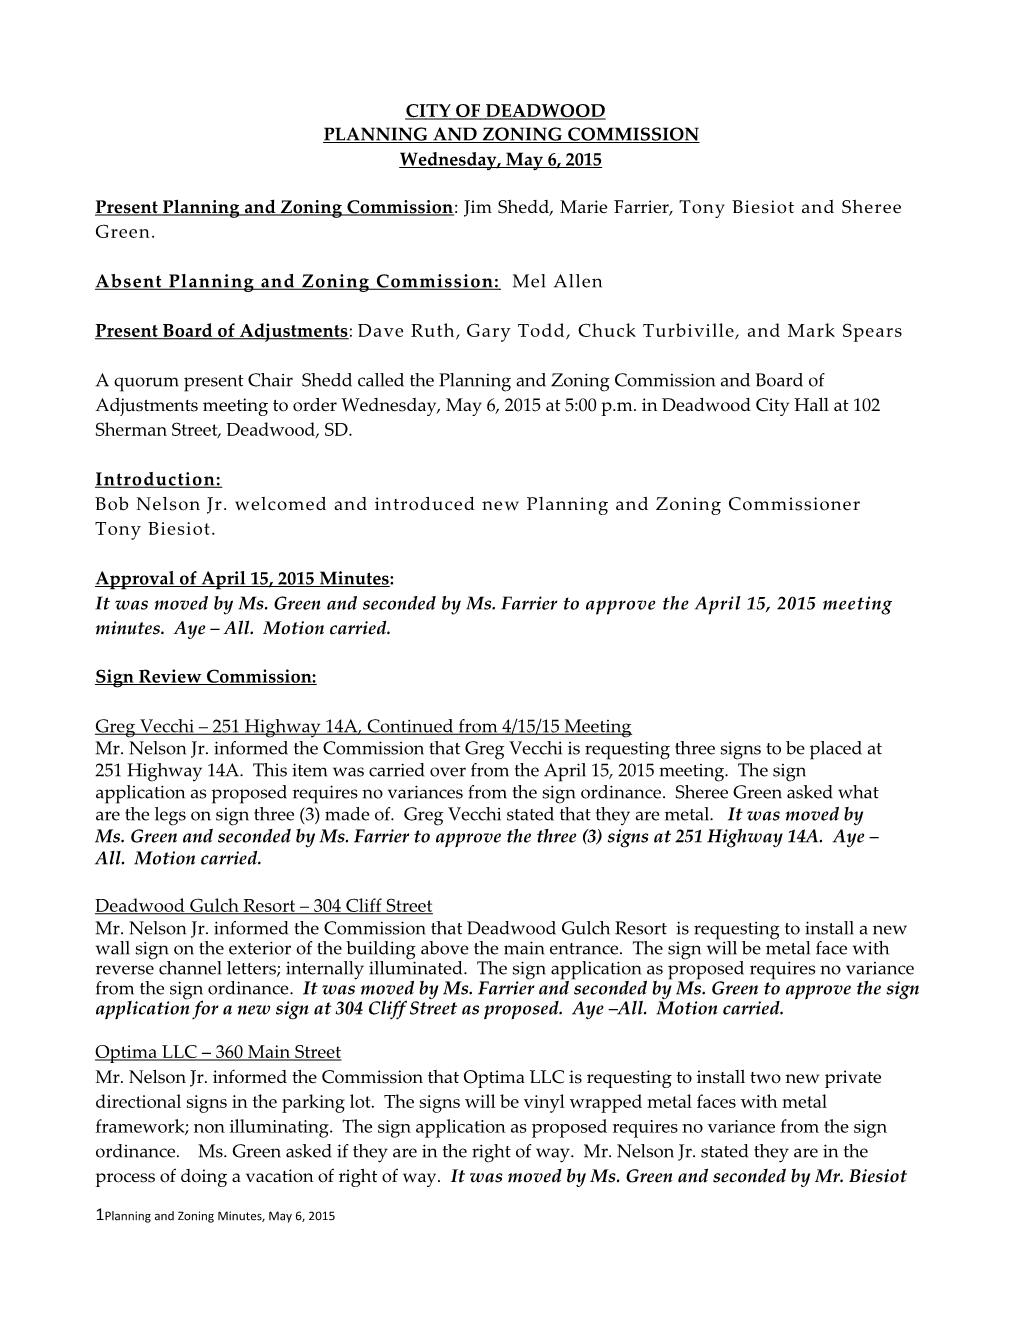 Absent Planning and Zoning Commission: Mel Allen